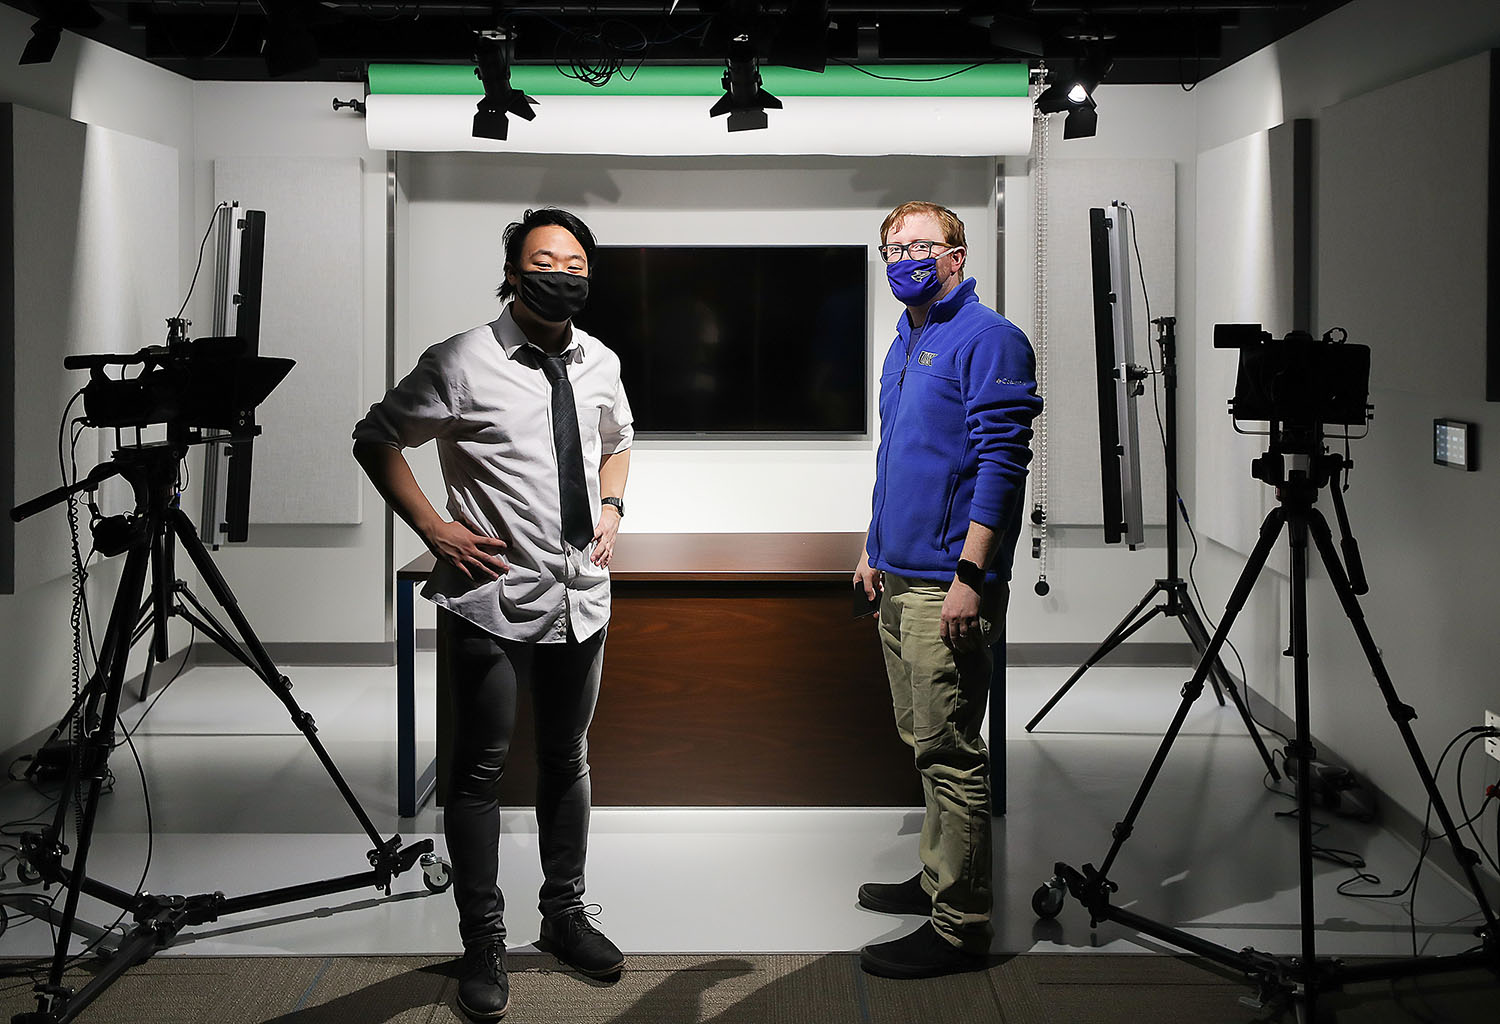 UNK junior Ryan Range, left, and associate communication professor Jacob Rosdail are pictured in the video studio inside Mitchell Center on campus. Range produced his documentary, “When The World Closed,” while working with Rosdail through UNK’s Summer Student Research Program.